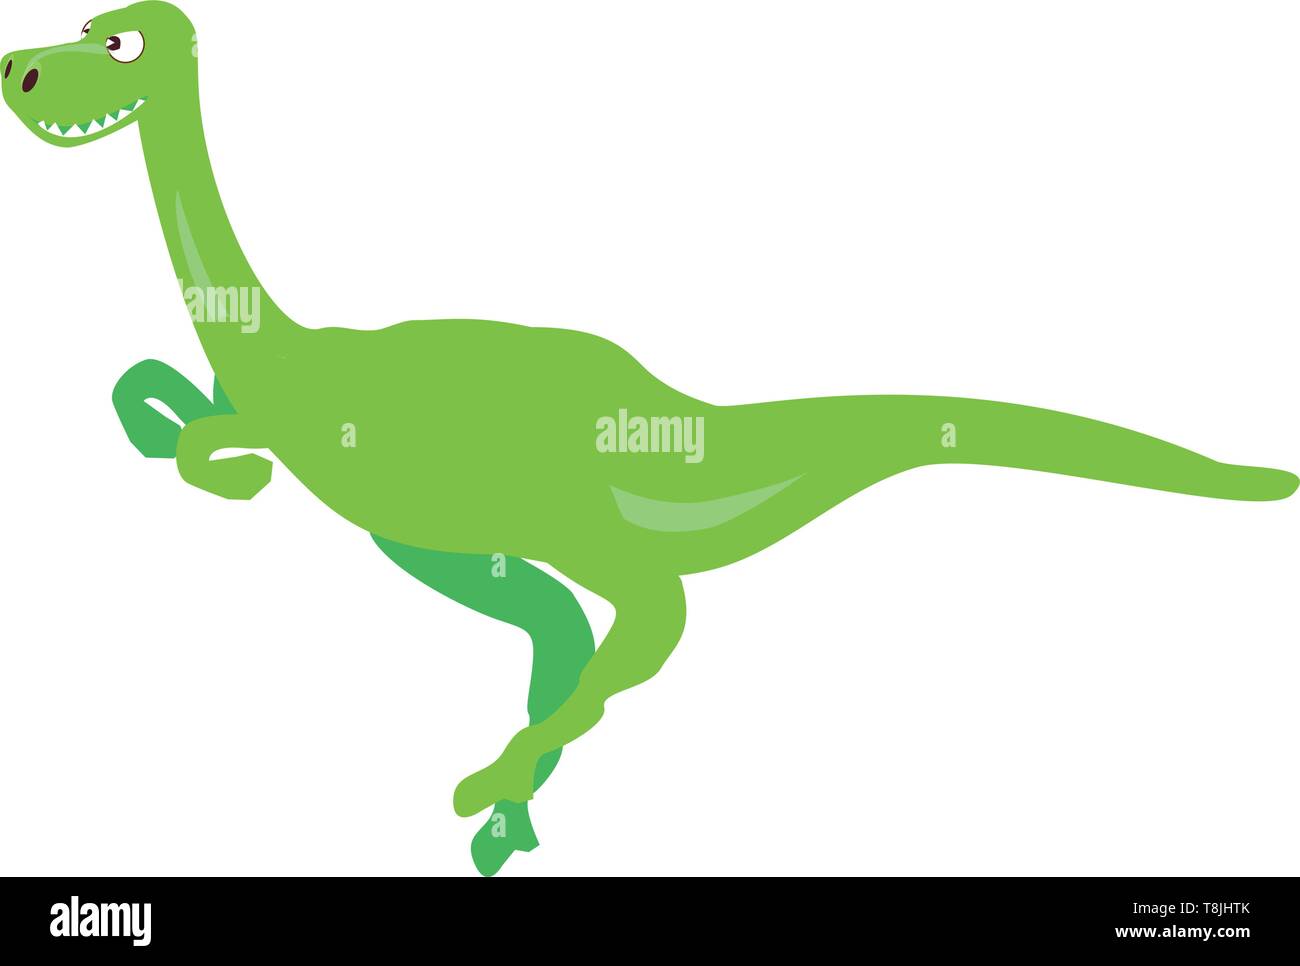 Green diplodocus dinosaur with long tail, teeth showing and eyes looks angry., vector, color drawing or illustration. Stock Vector